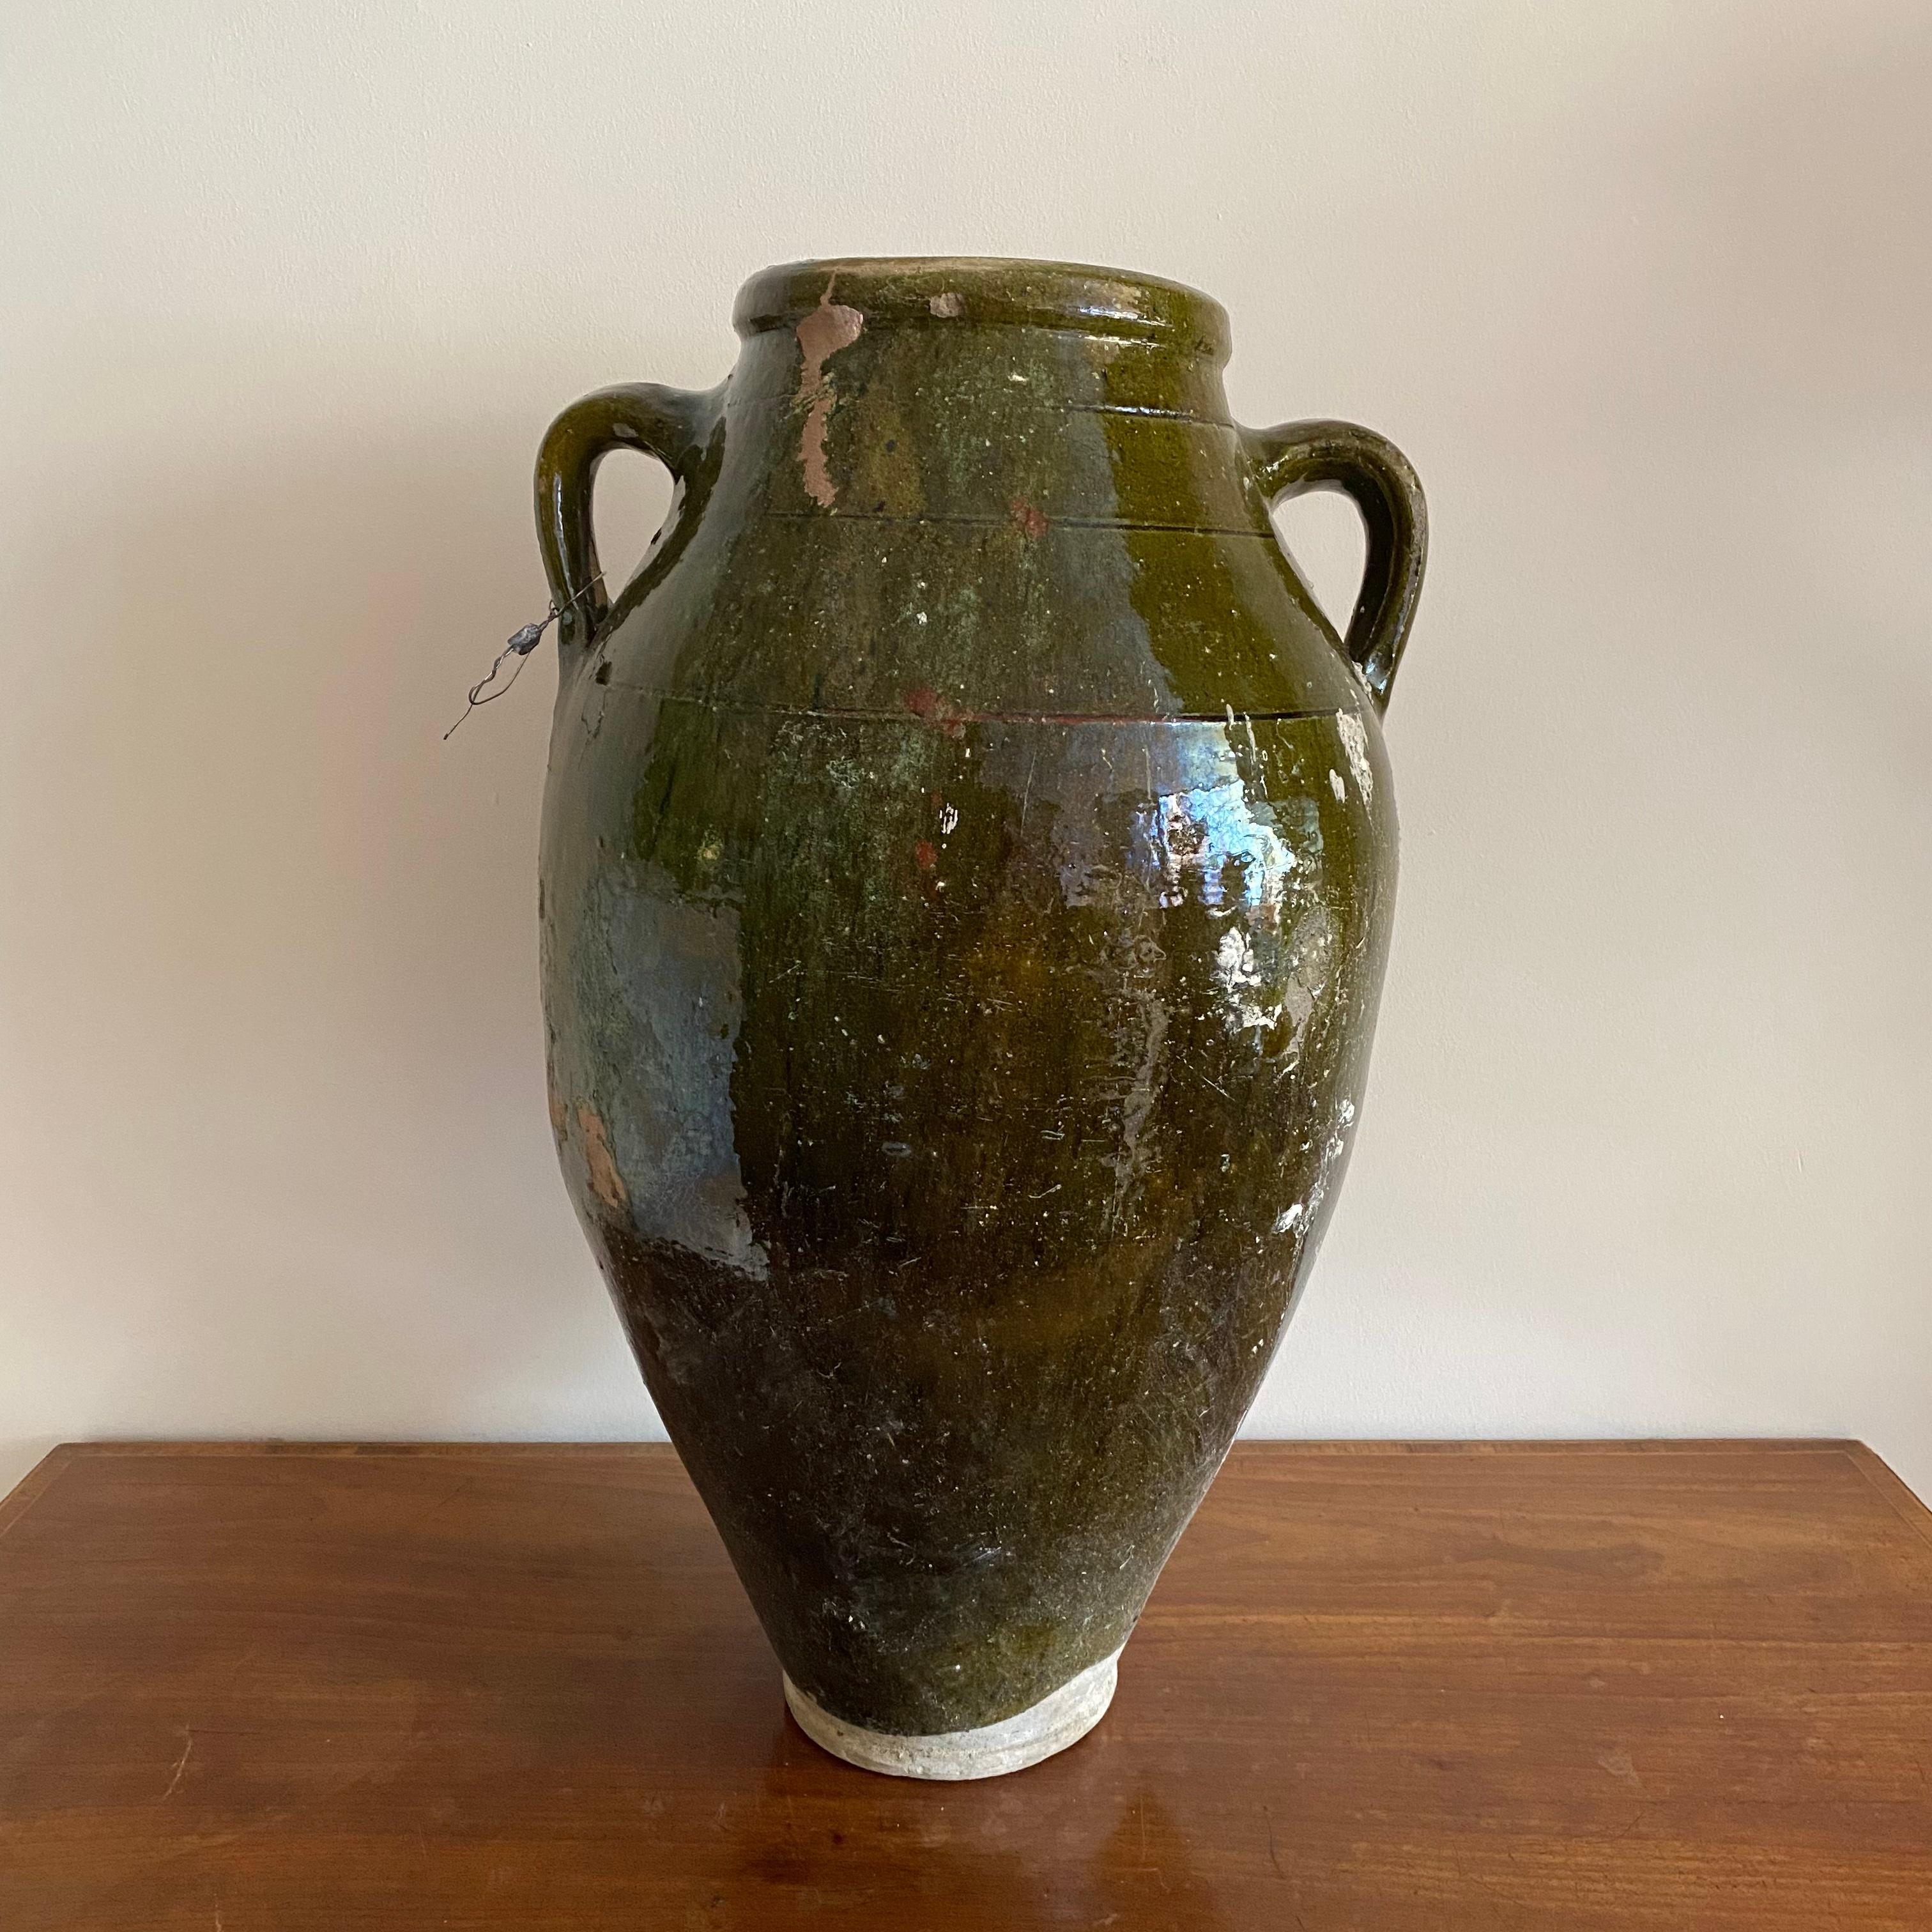 A very large French urn shaped pot with green glaze and 2 handles. Retaining its original lead seal.

Measures: height: 53 cm

Width: 31 cm

Depth: 29 cm.